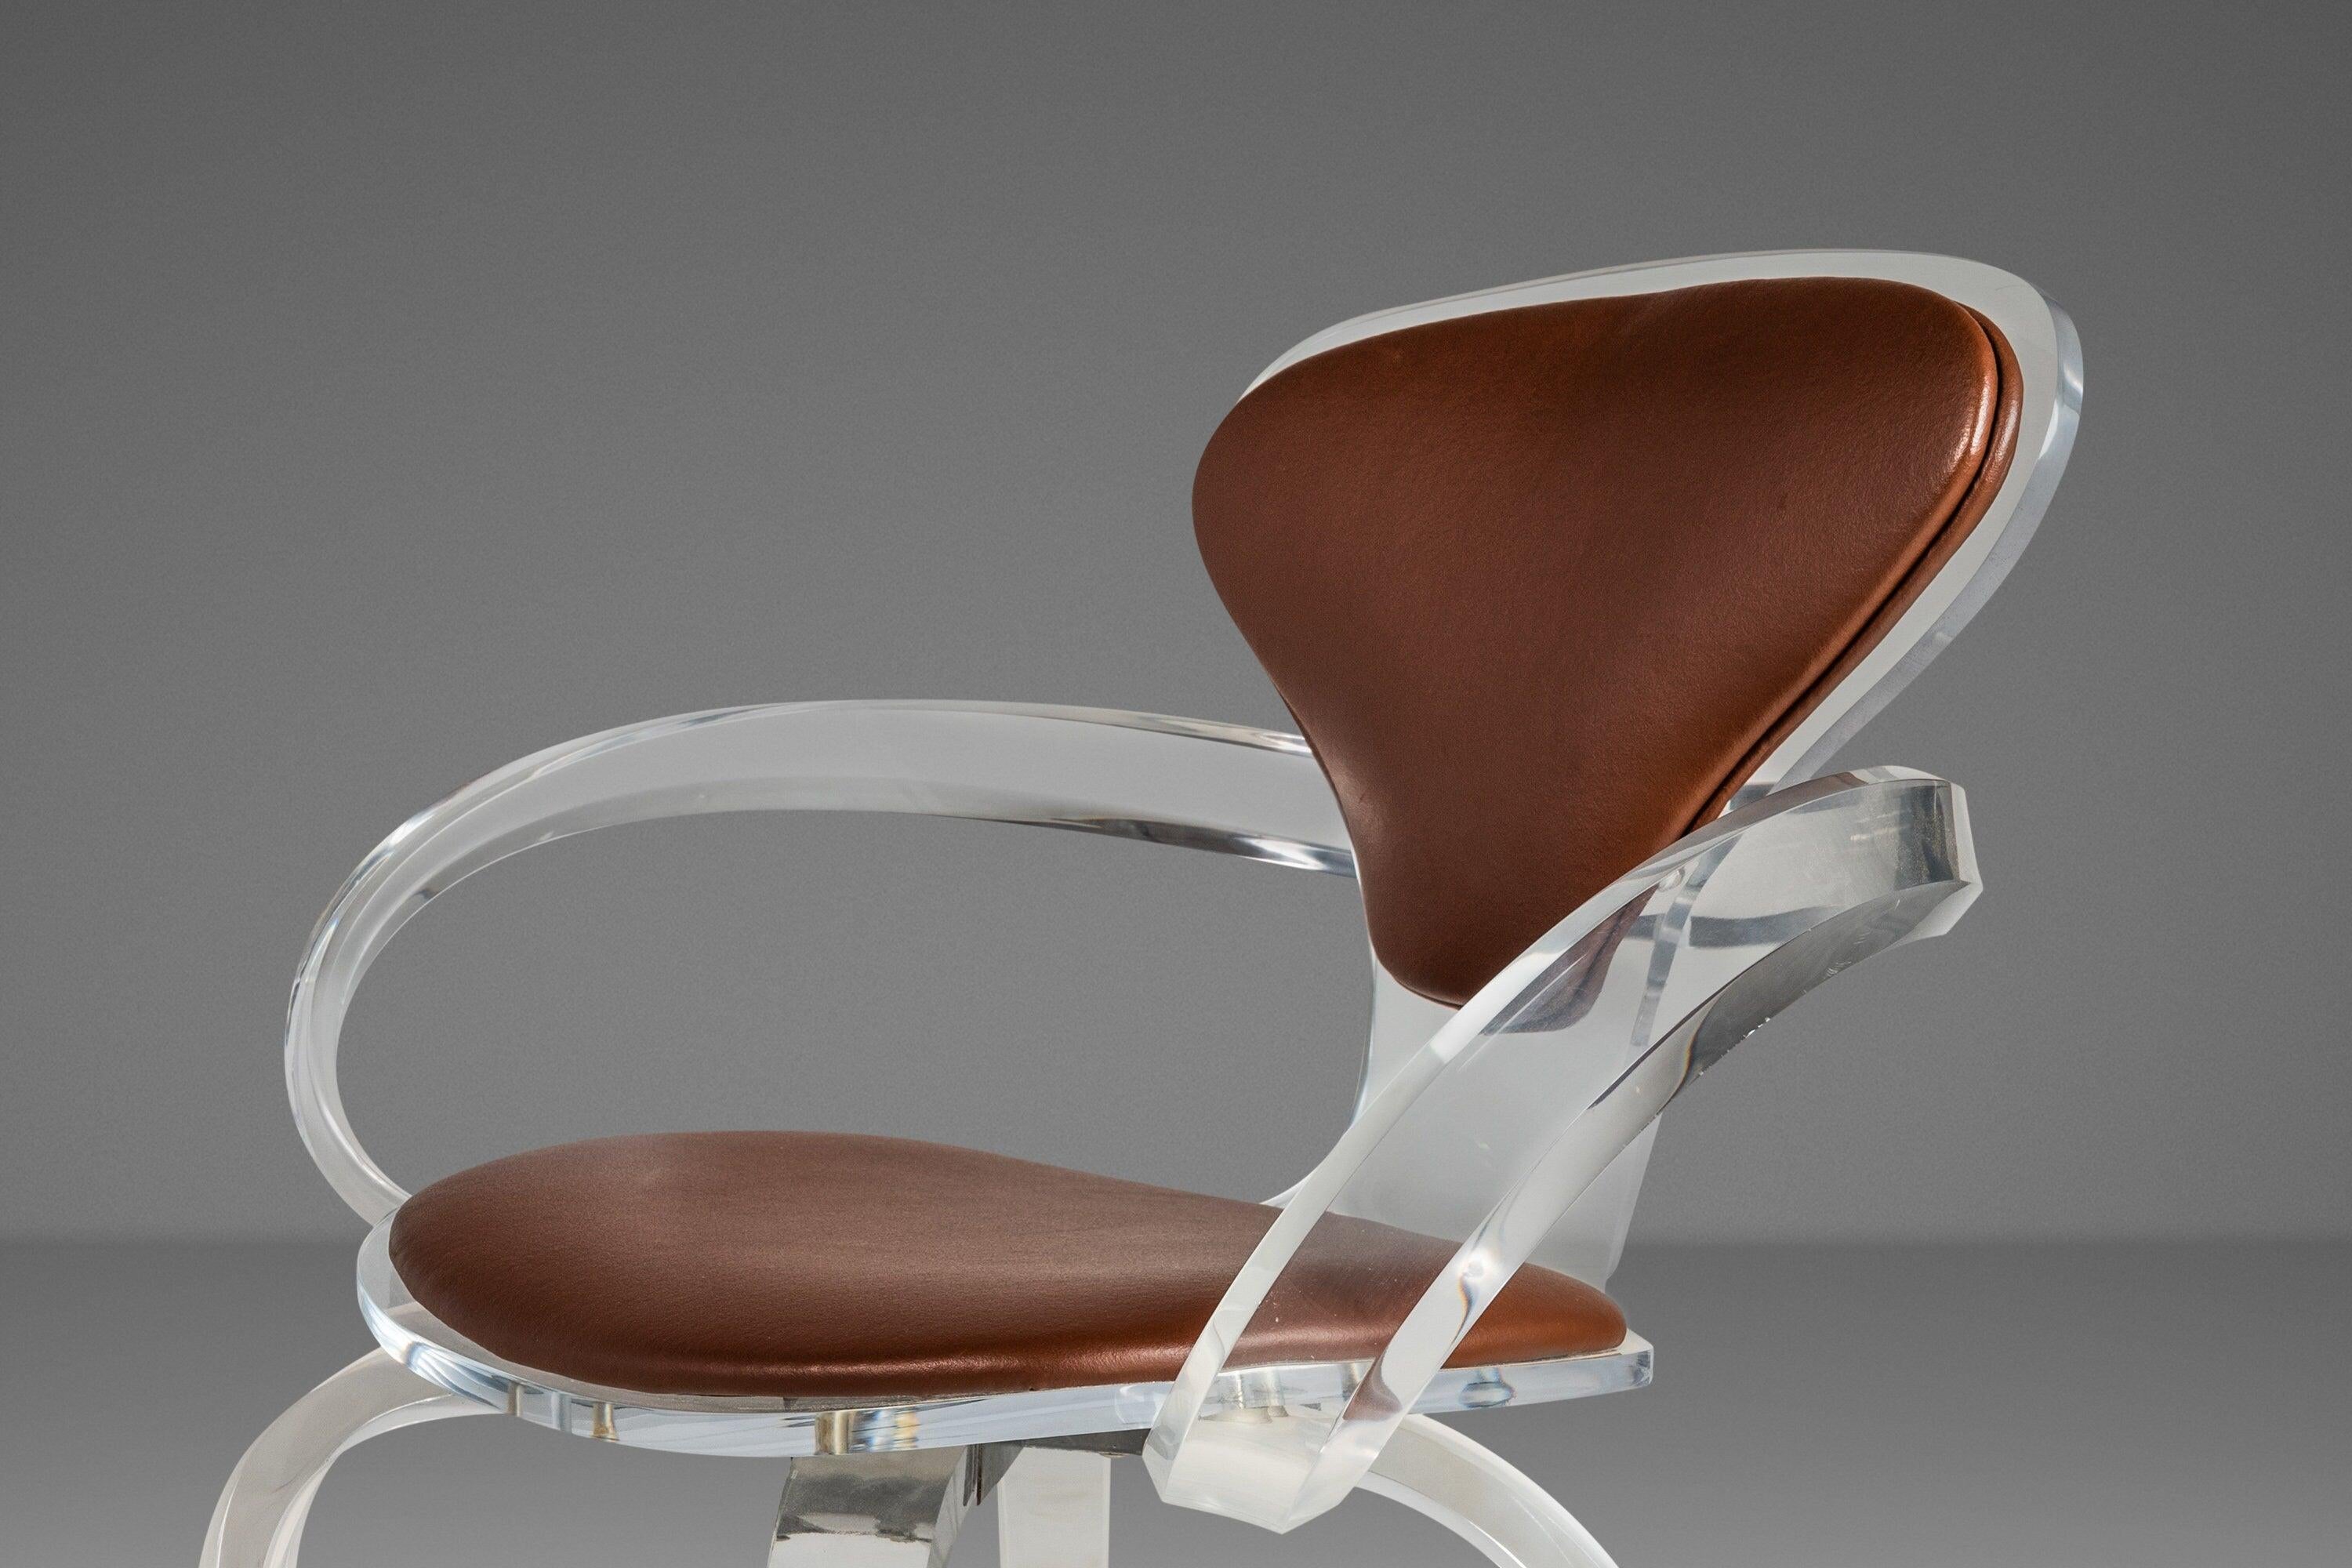 As elegant as they are rare this exquisite set of custom-made pretzel chairs is unlike anything we've ever seen. This extraordinary set is constructed from solid polymethyl methacrylate (AKA lucite) and modeled after the iconic pretzel chair